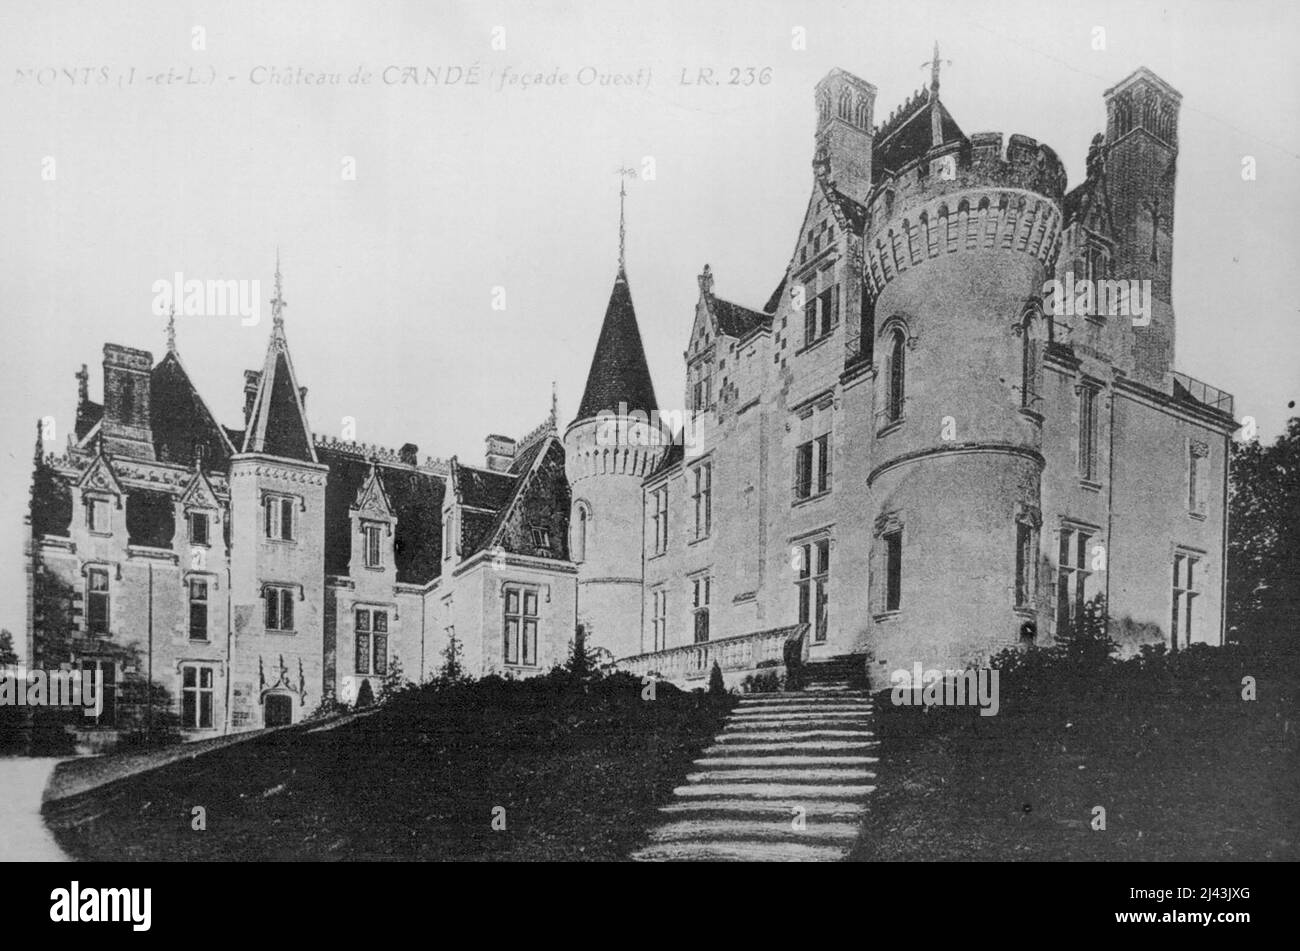 French Chateau Where Mrs Simpson is Staying The west front of the Chateau De Cande at Blois, near Tours, France. Owned by Mr and Mrs Charles E Bedaux, is now the Home of Mrs Ernest Simpson. April 27, 1937. (Photo by The Associated Press). Stock Photo